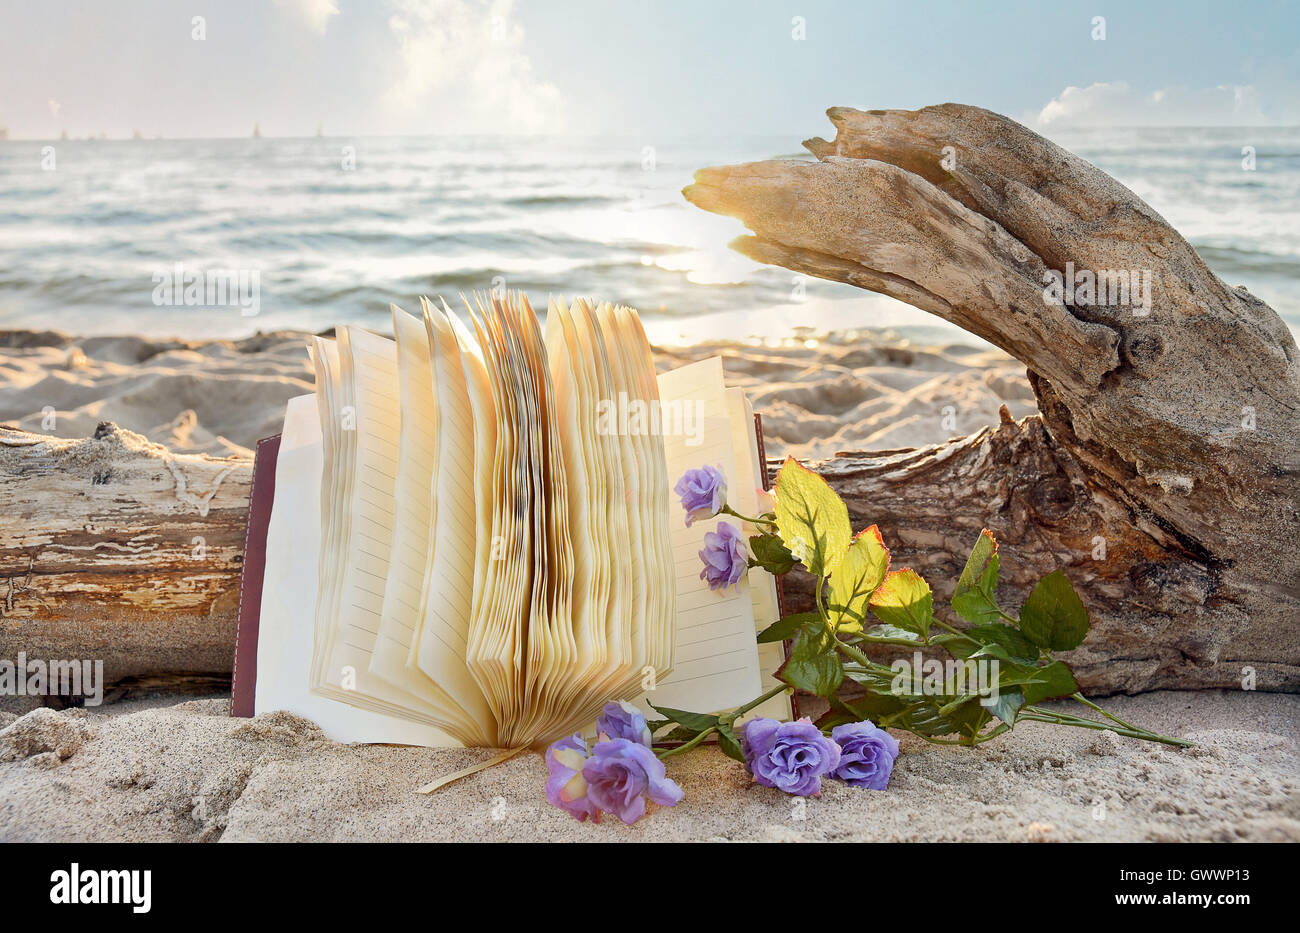 open journal and purple roses in beach sand with driftwood log Stock Photo